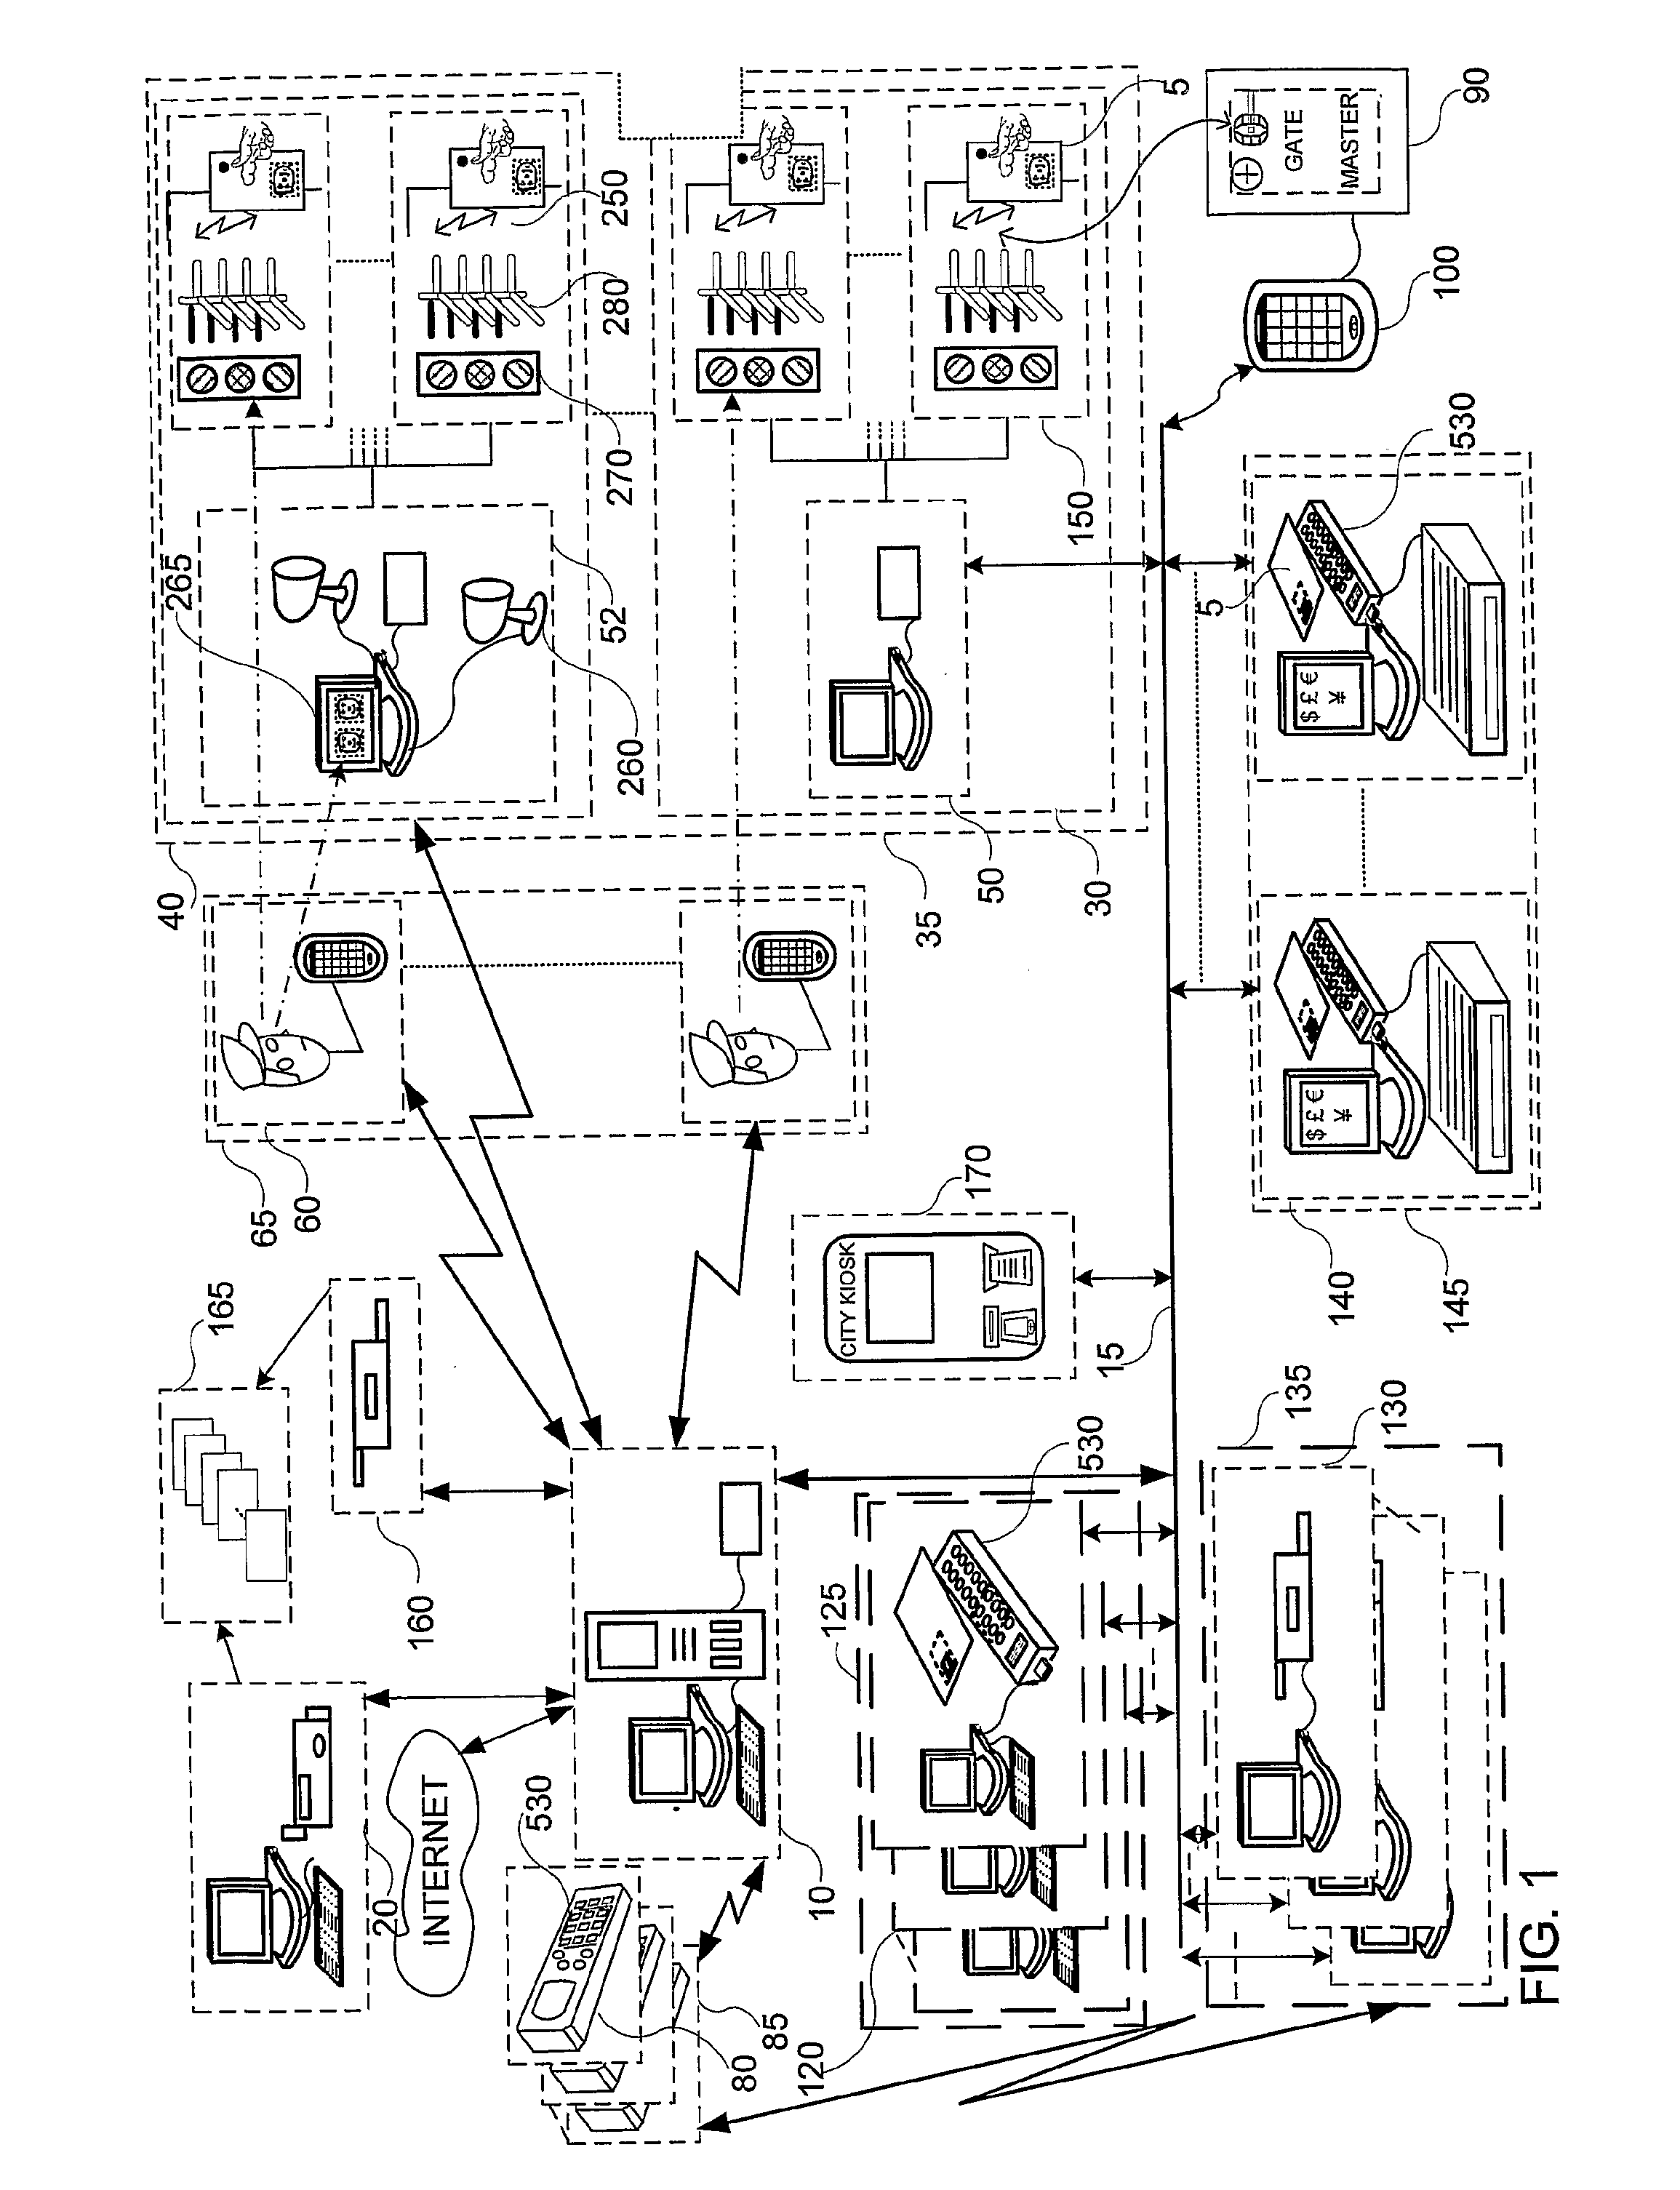 System and Methods for Accelerated Recognition and Processing of Personal Privilege Operative for Controlling Large Closed Group Environments